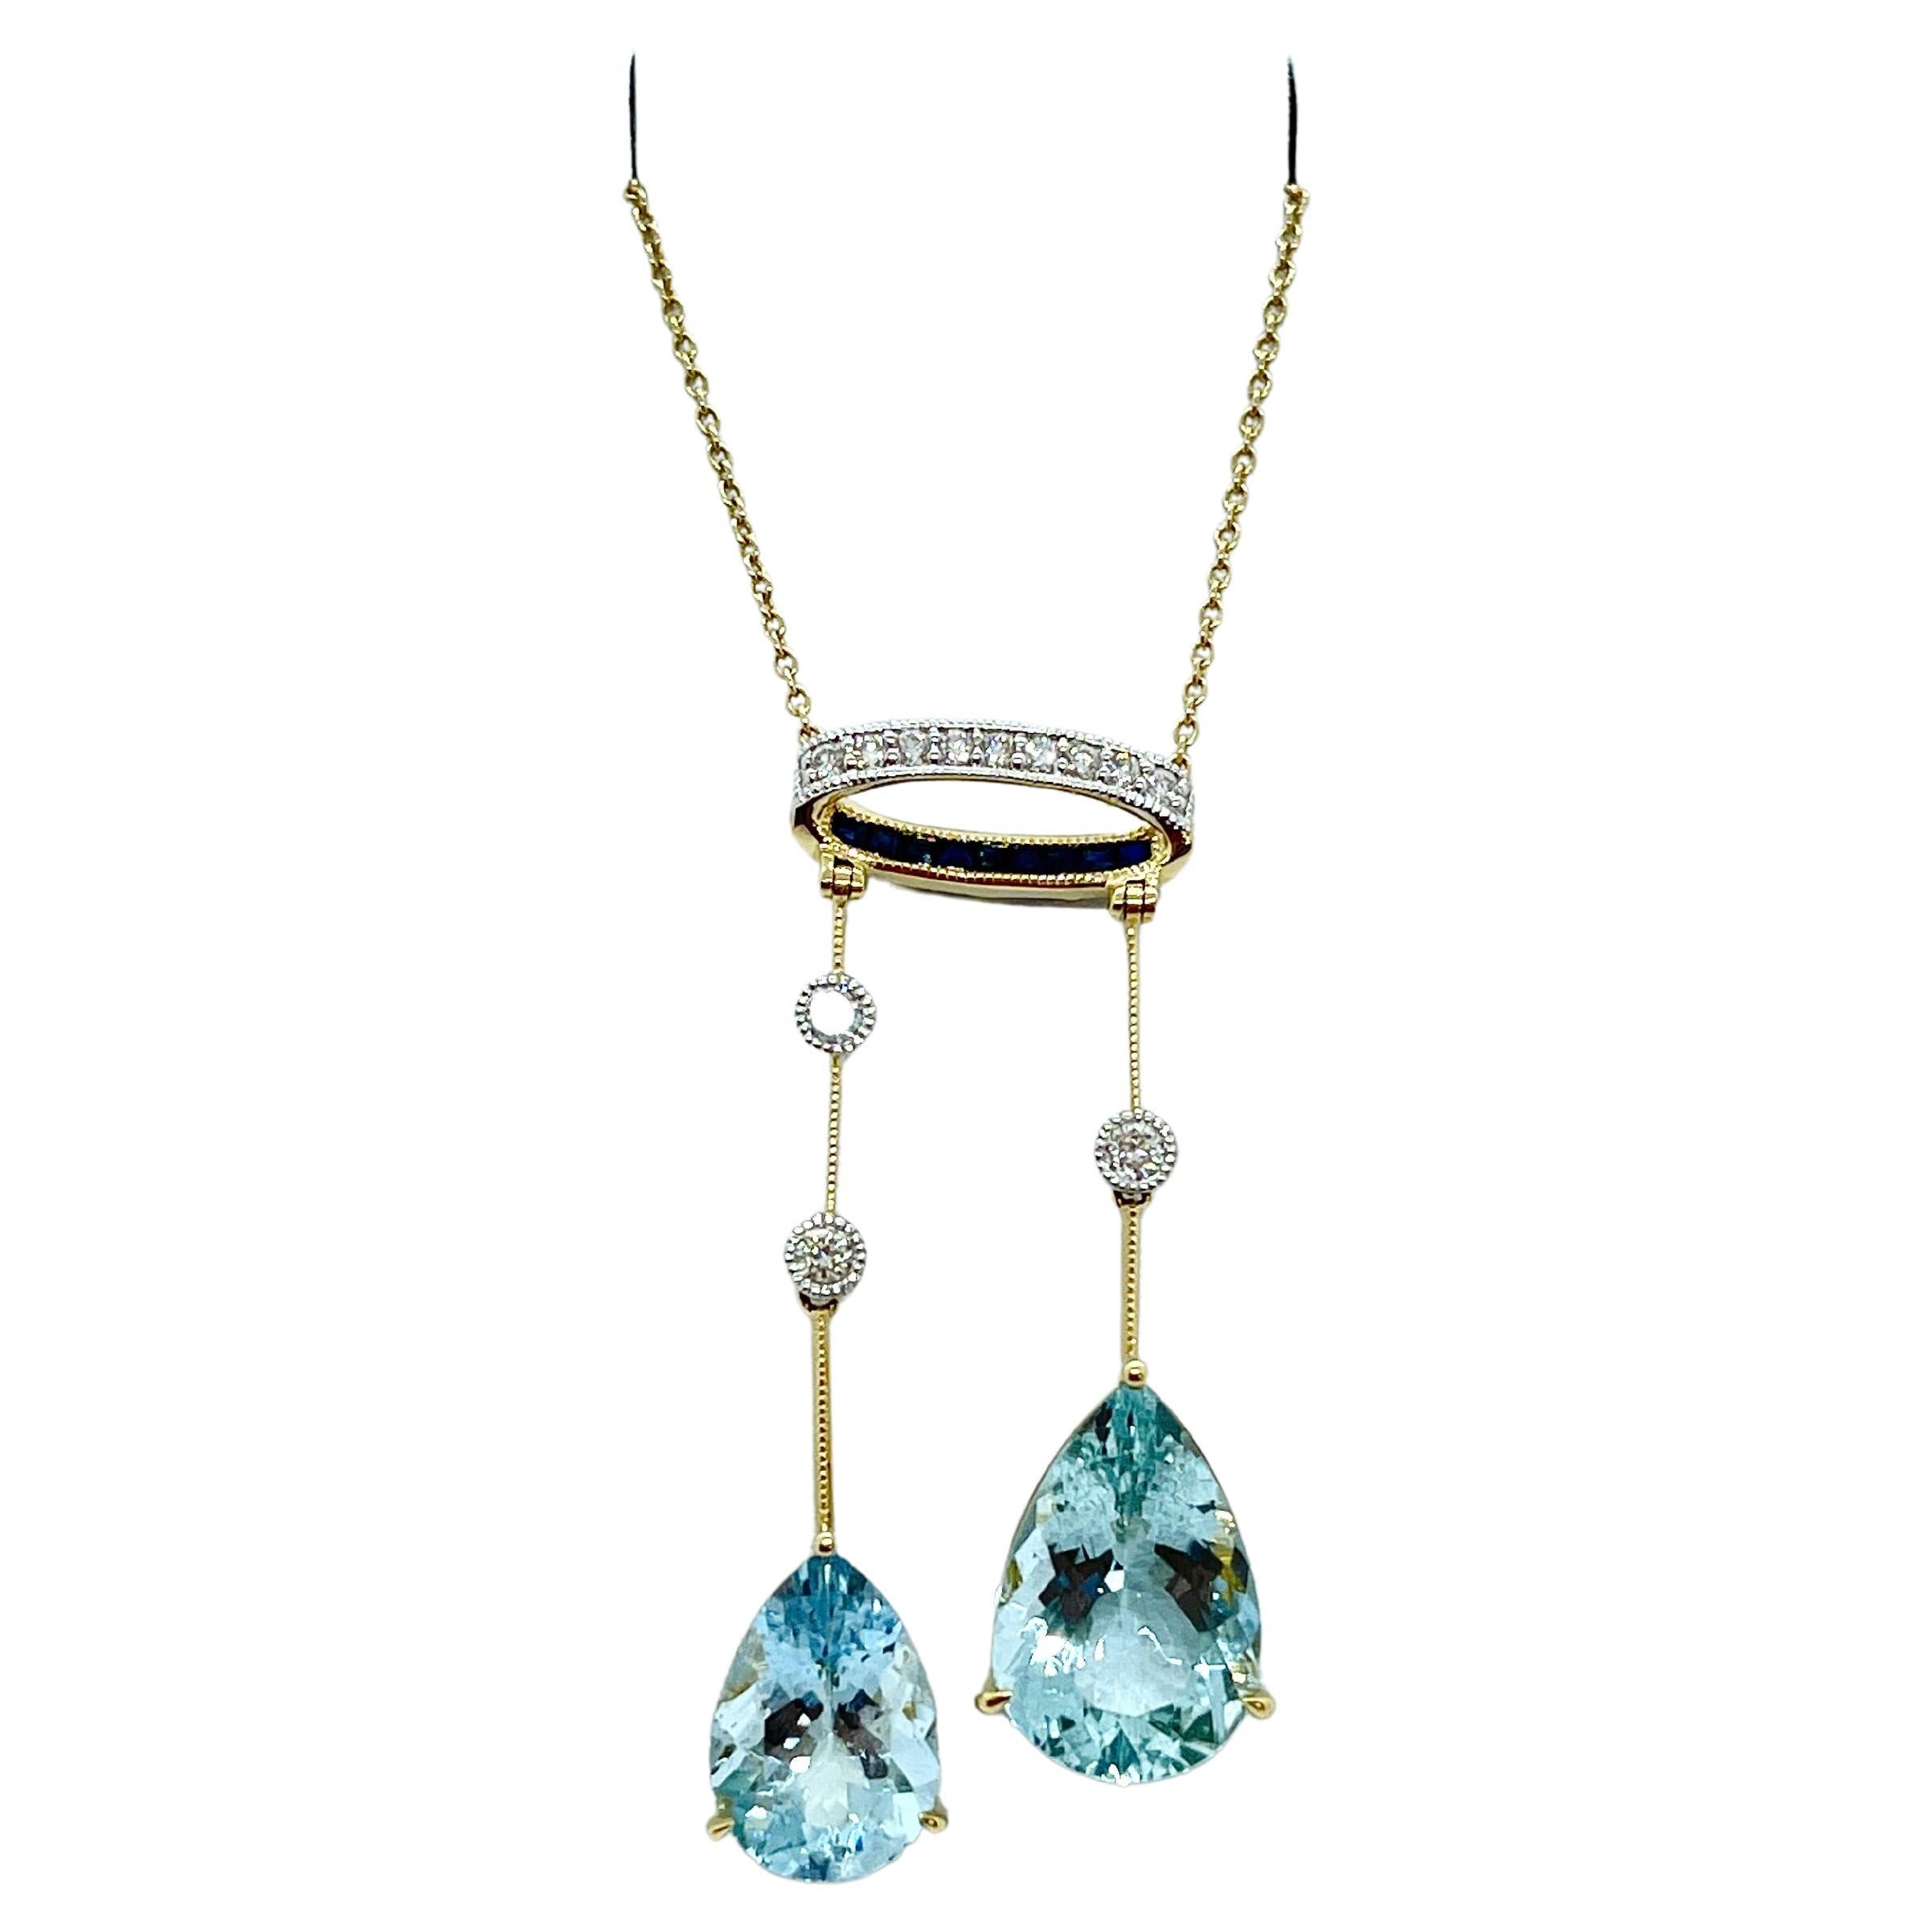 Natural Pear Shaped Aquamarine Diamond, Sapphire Pendant Necklace with Valuation For Sale